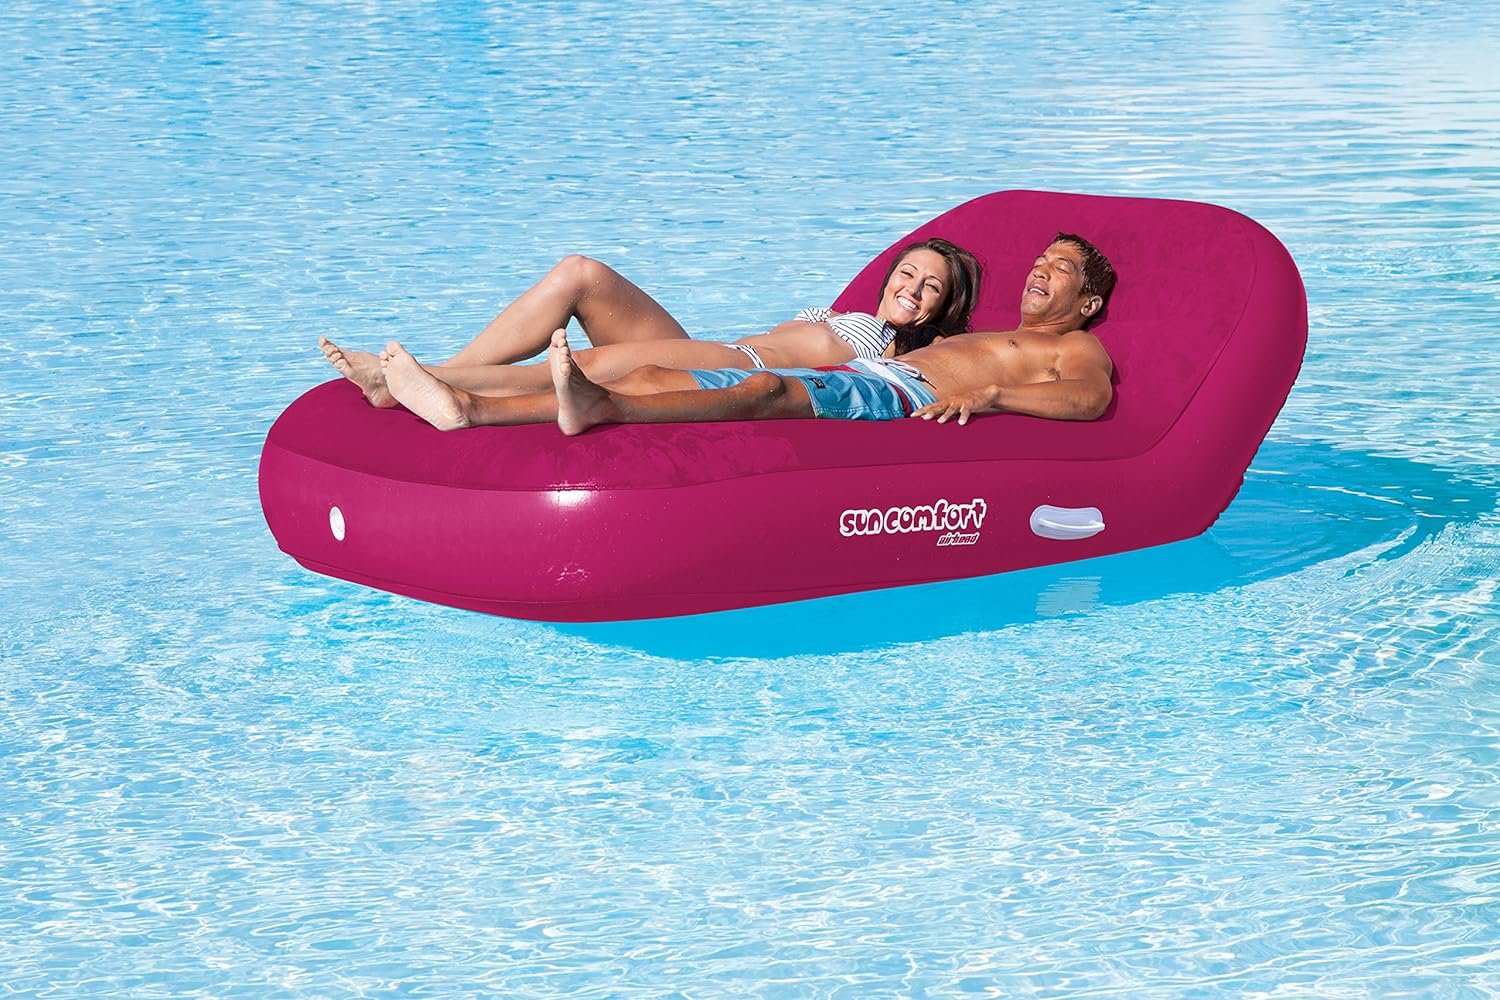 Airhead Sun Comfort Cool Suede Double Chaise Lounge Pool Float Review